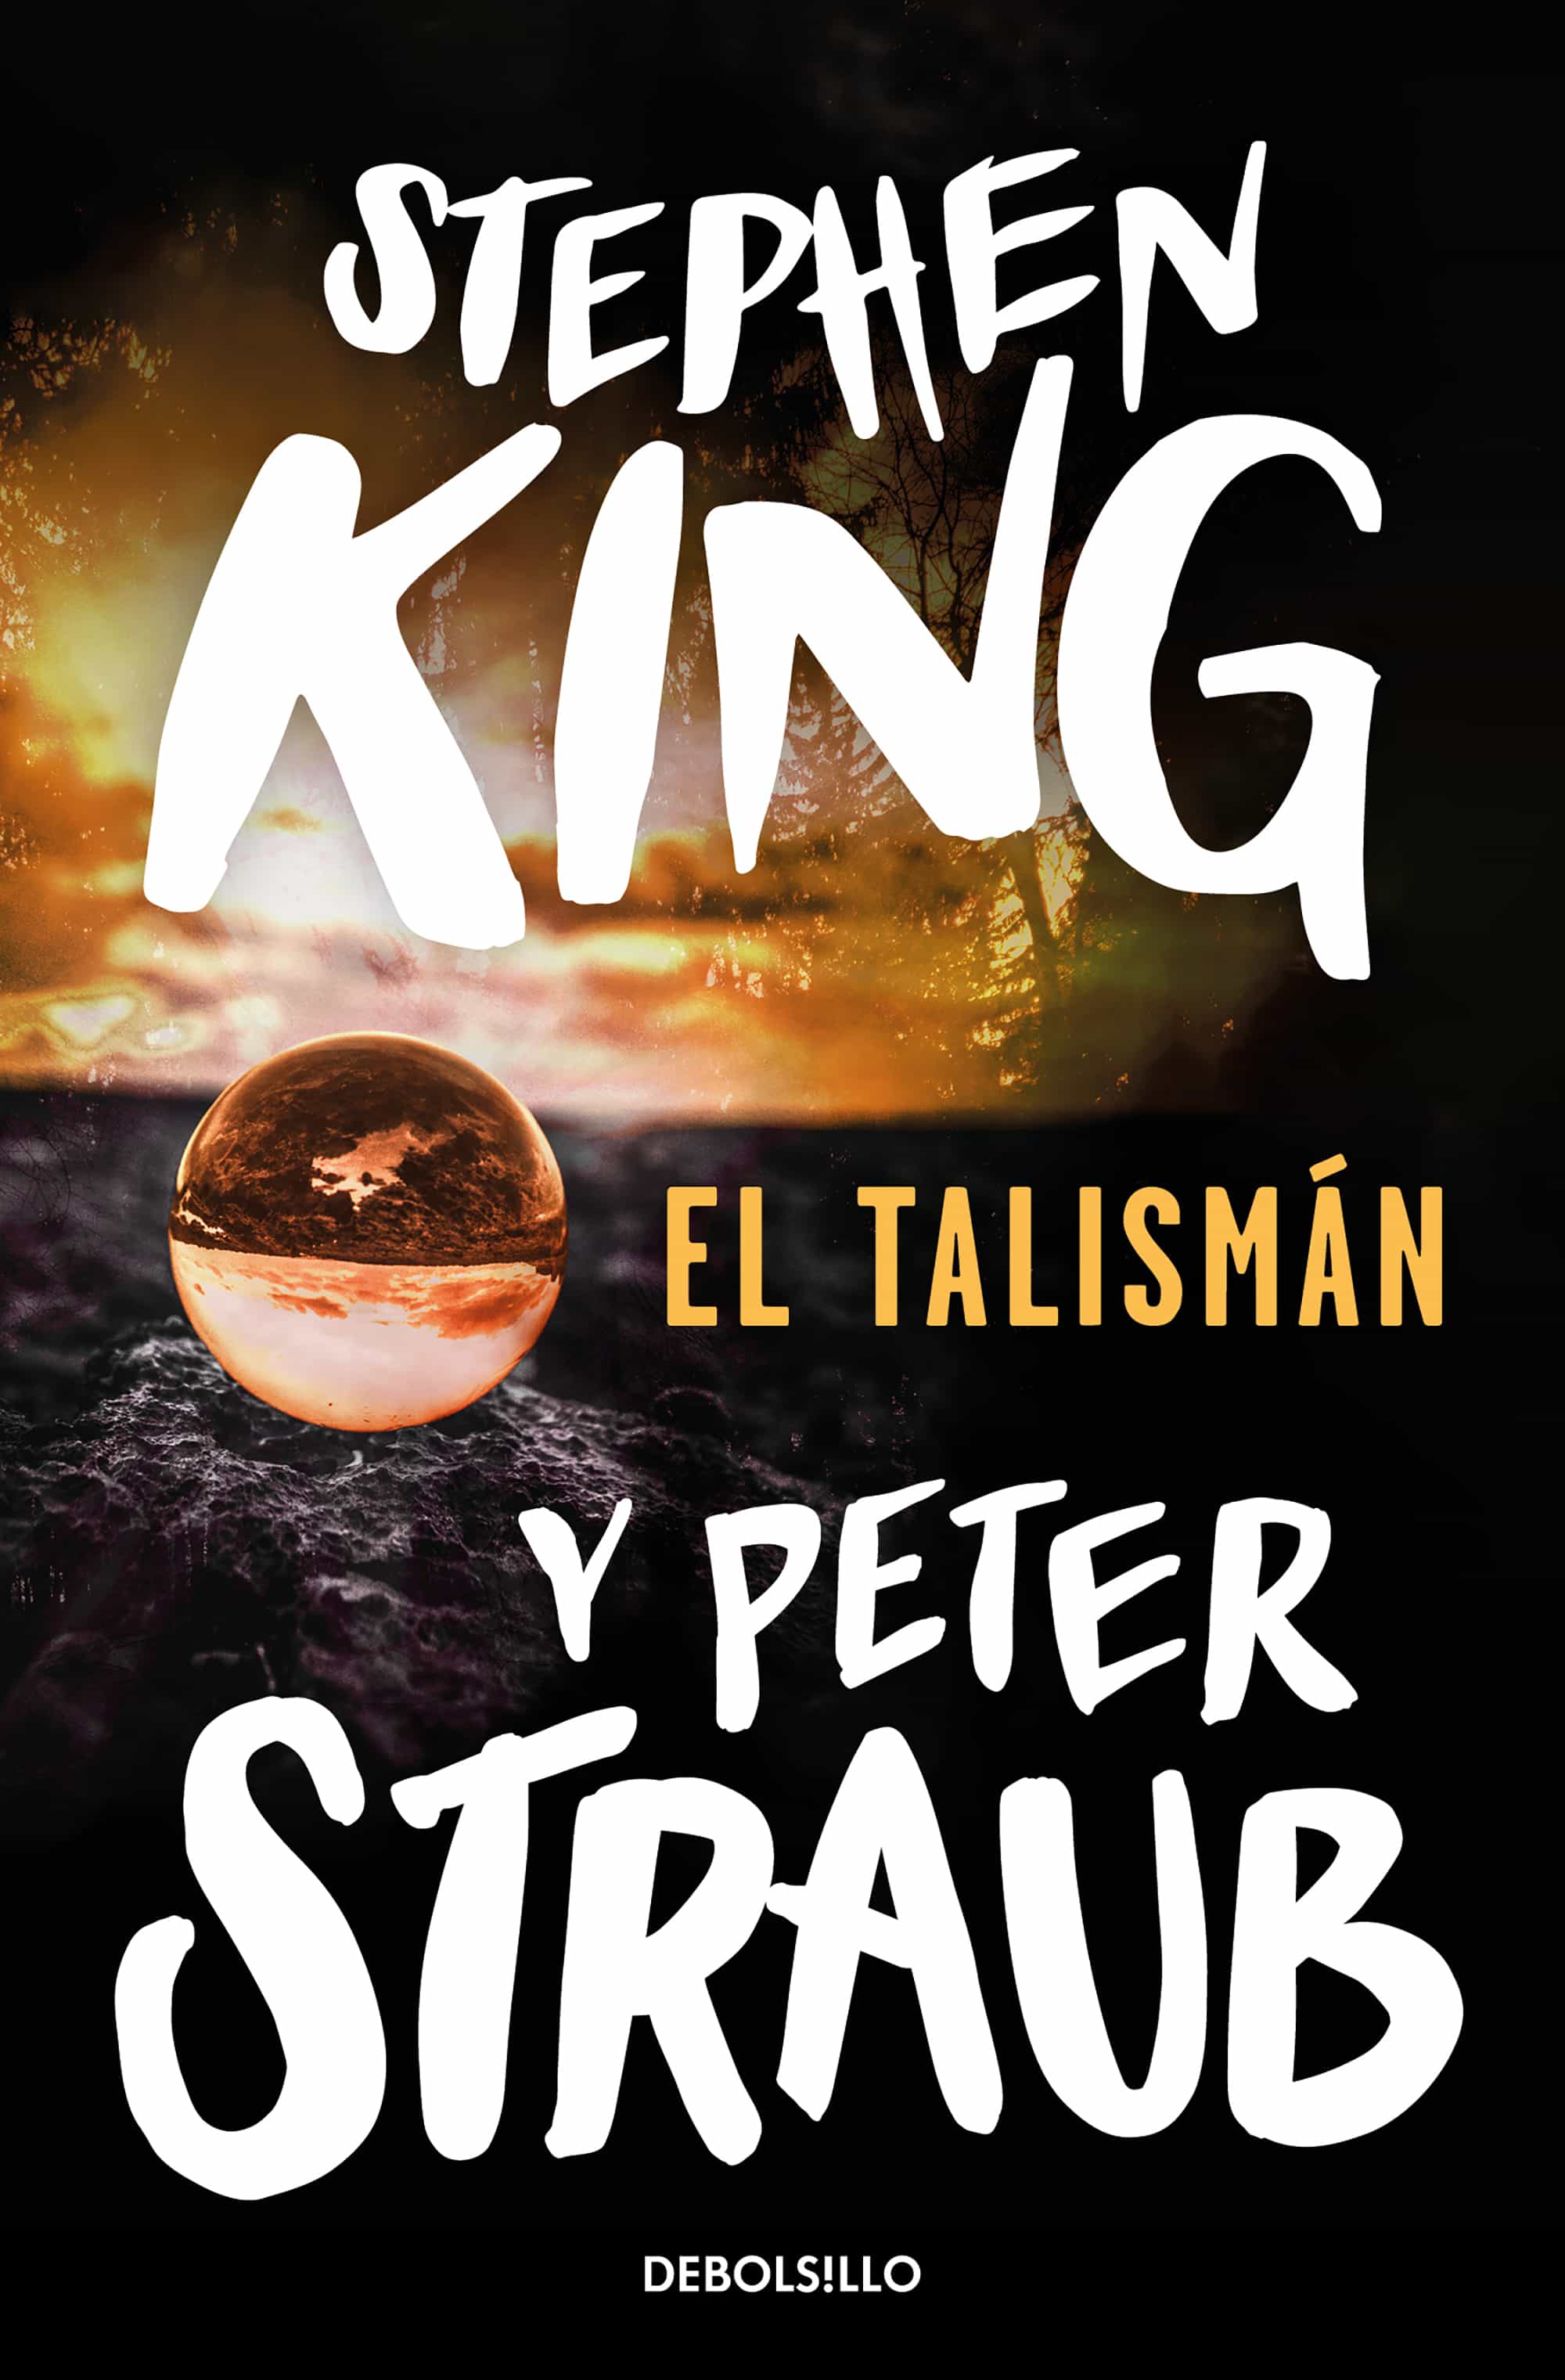 The Talisman by Stephen King